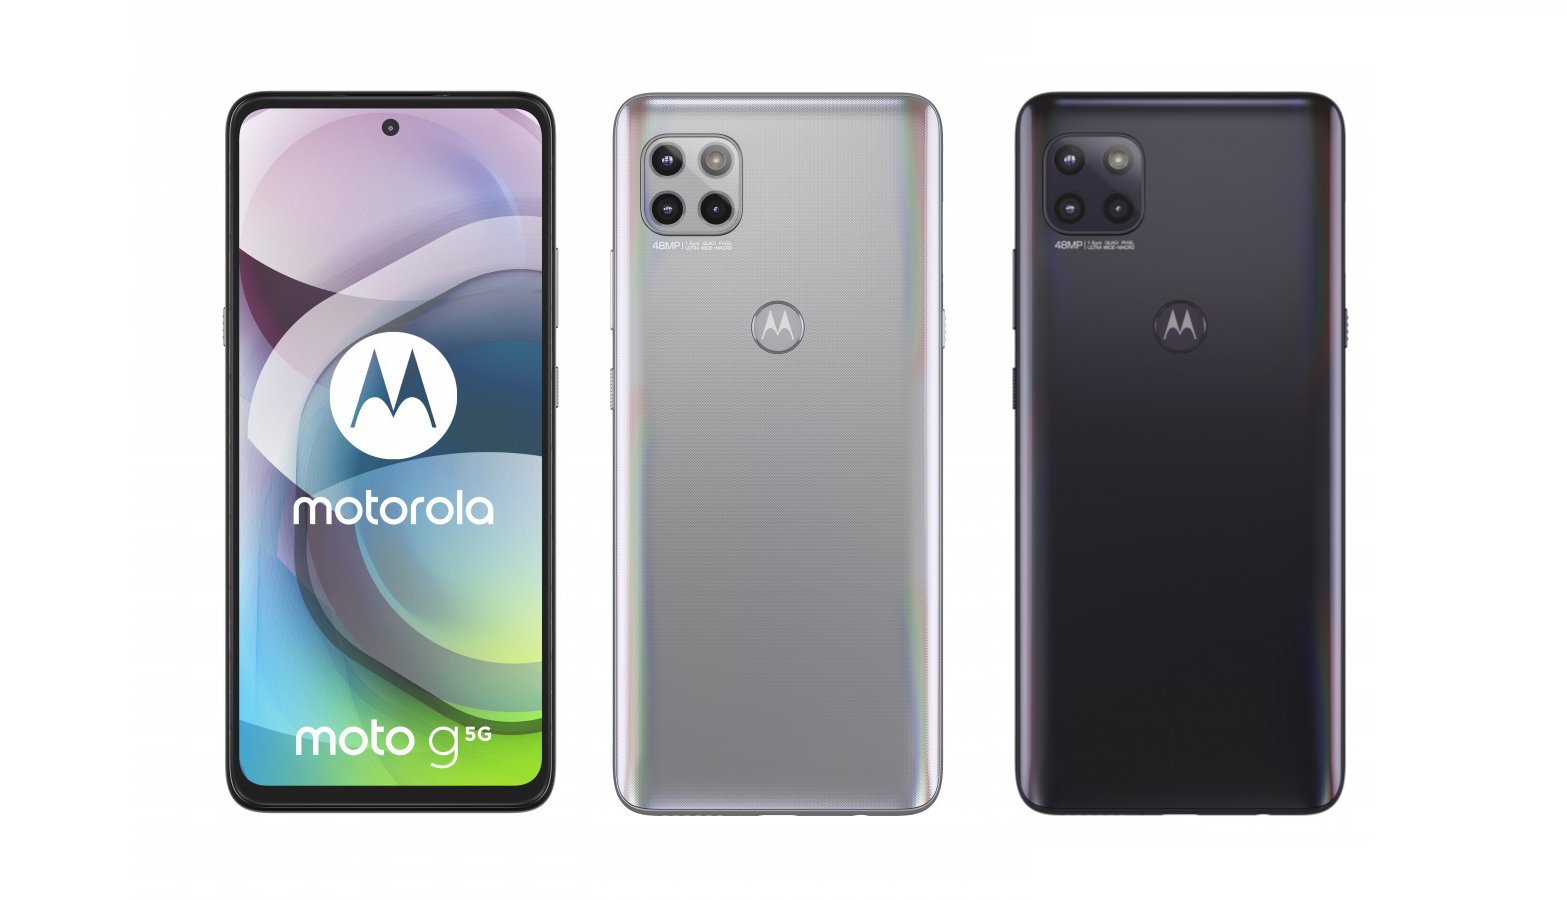 Moto G 5G Motorola launches a midrange smartphone with a Snapdragon